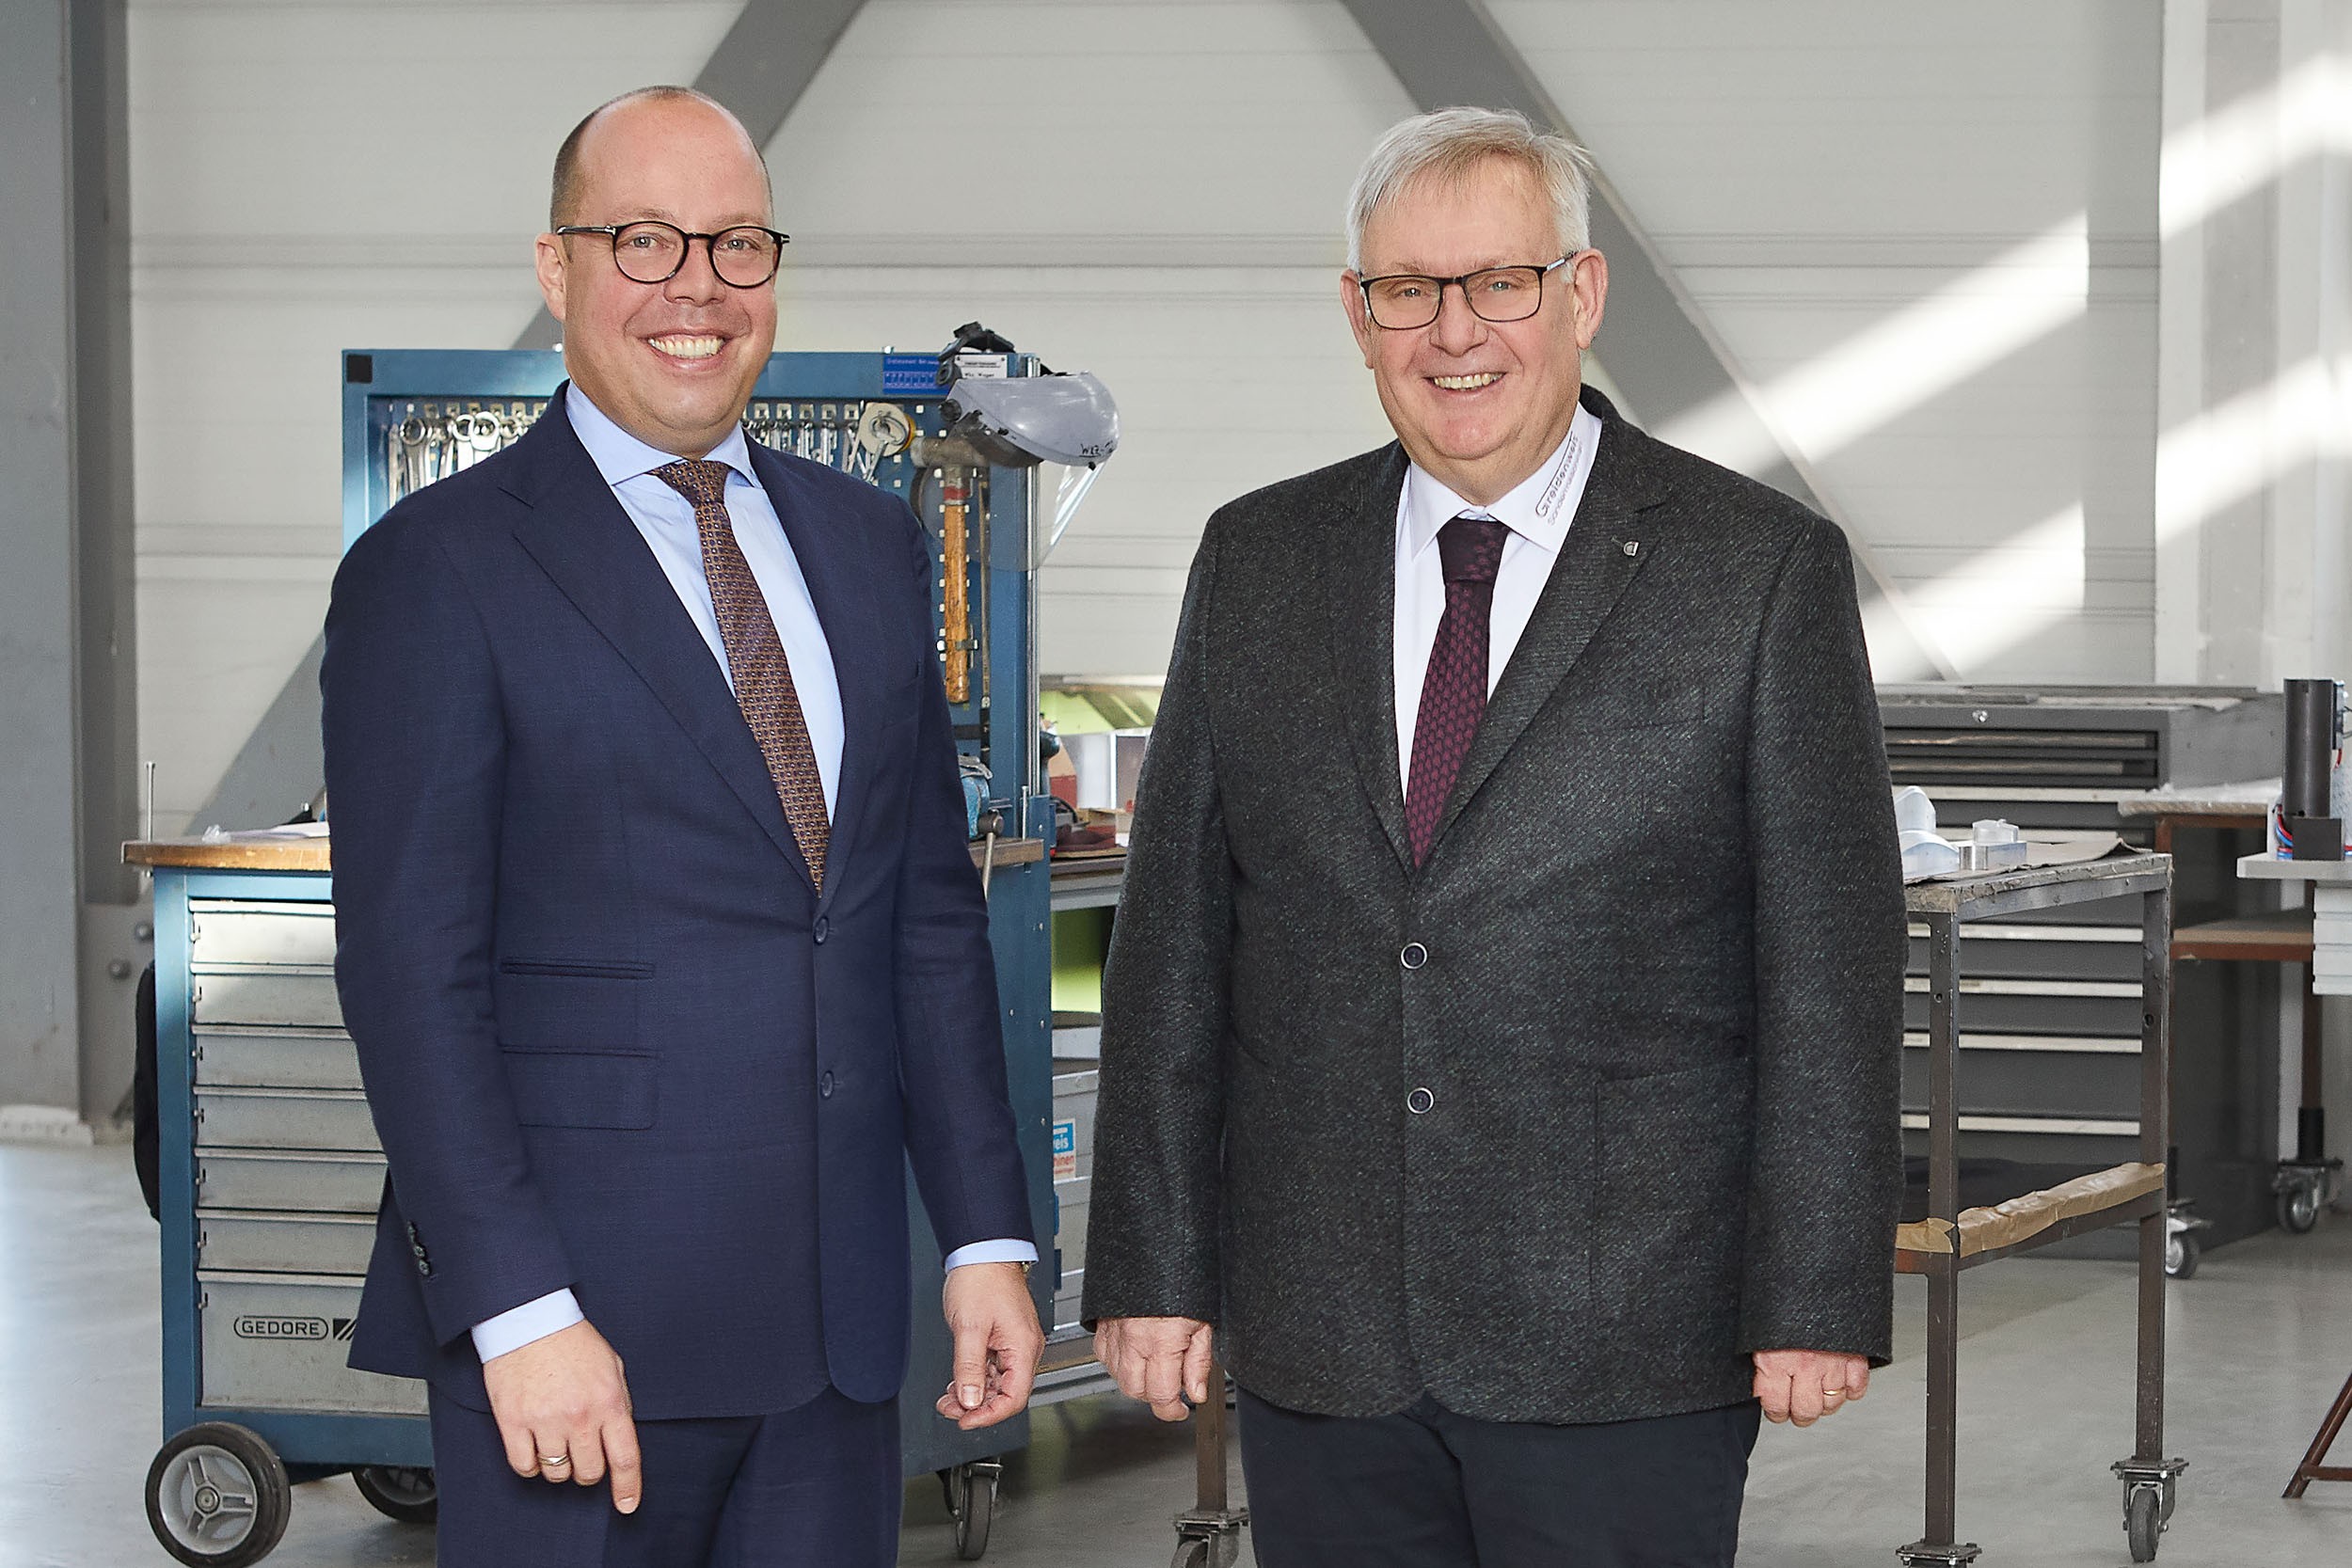 Carsten Liske, CEO of the CHIRON Group SE, and Michael Greidenweis, owner and managing director of Greidenweis Maschinenbau GmbH & Co. KG, have set the course for a joint future.